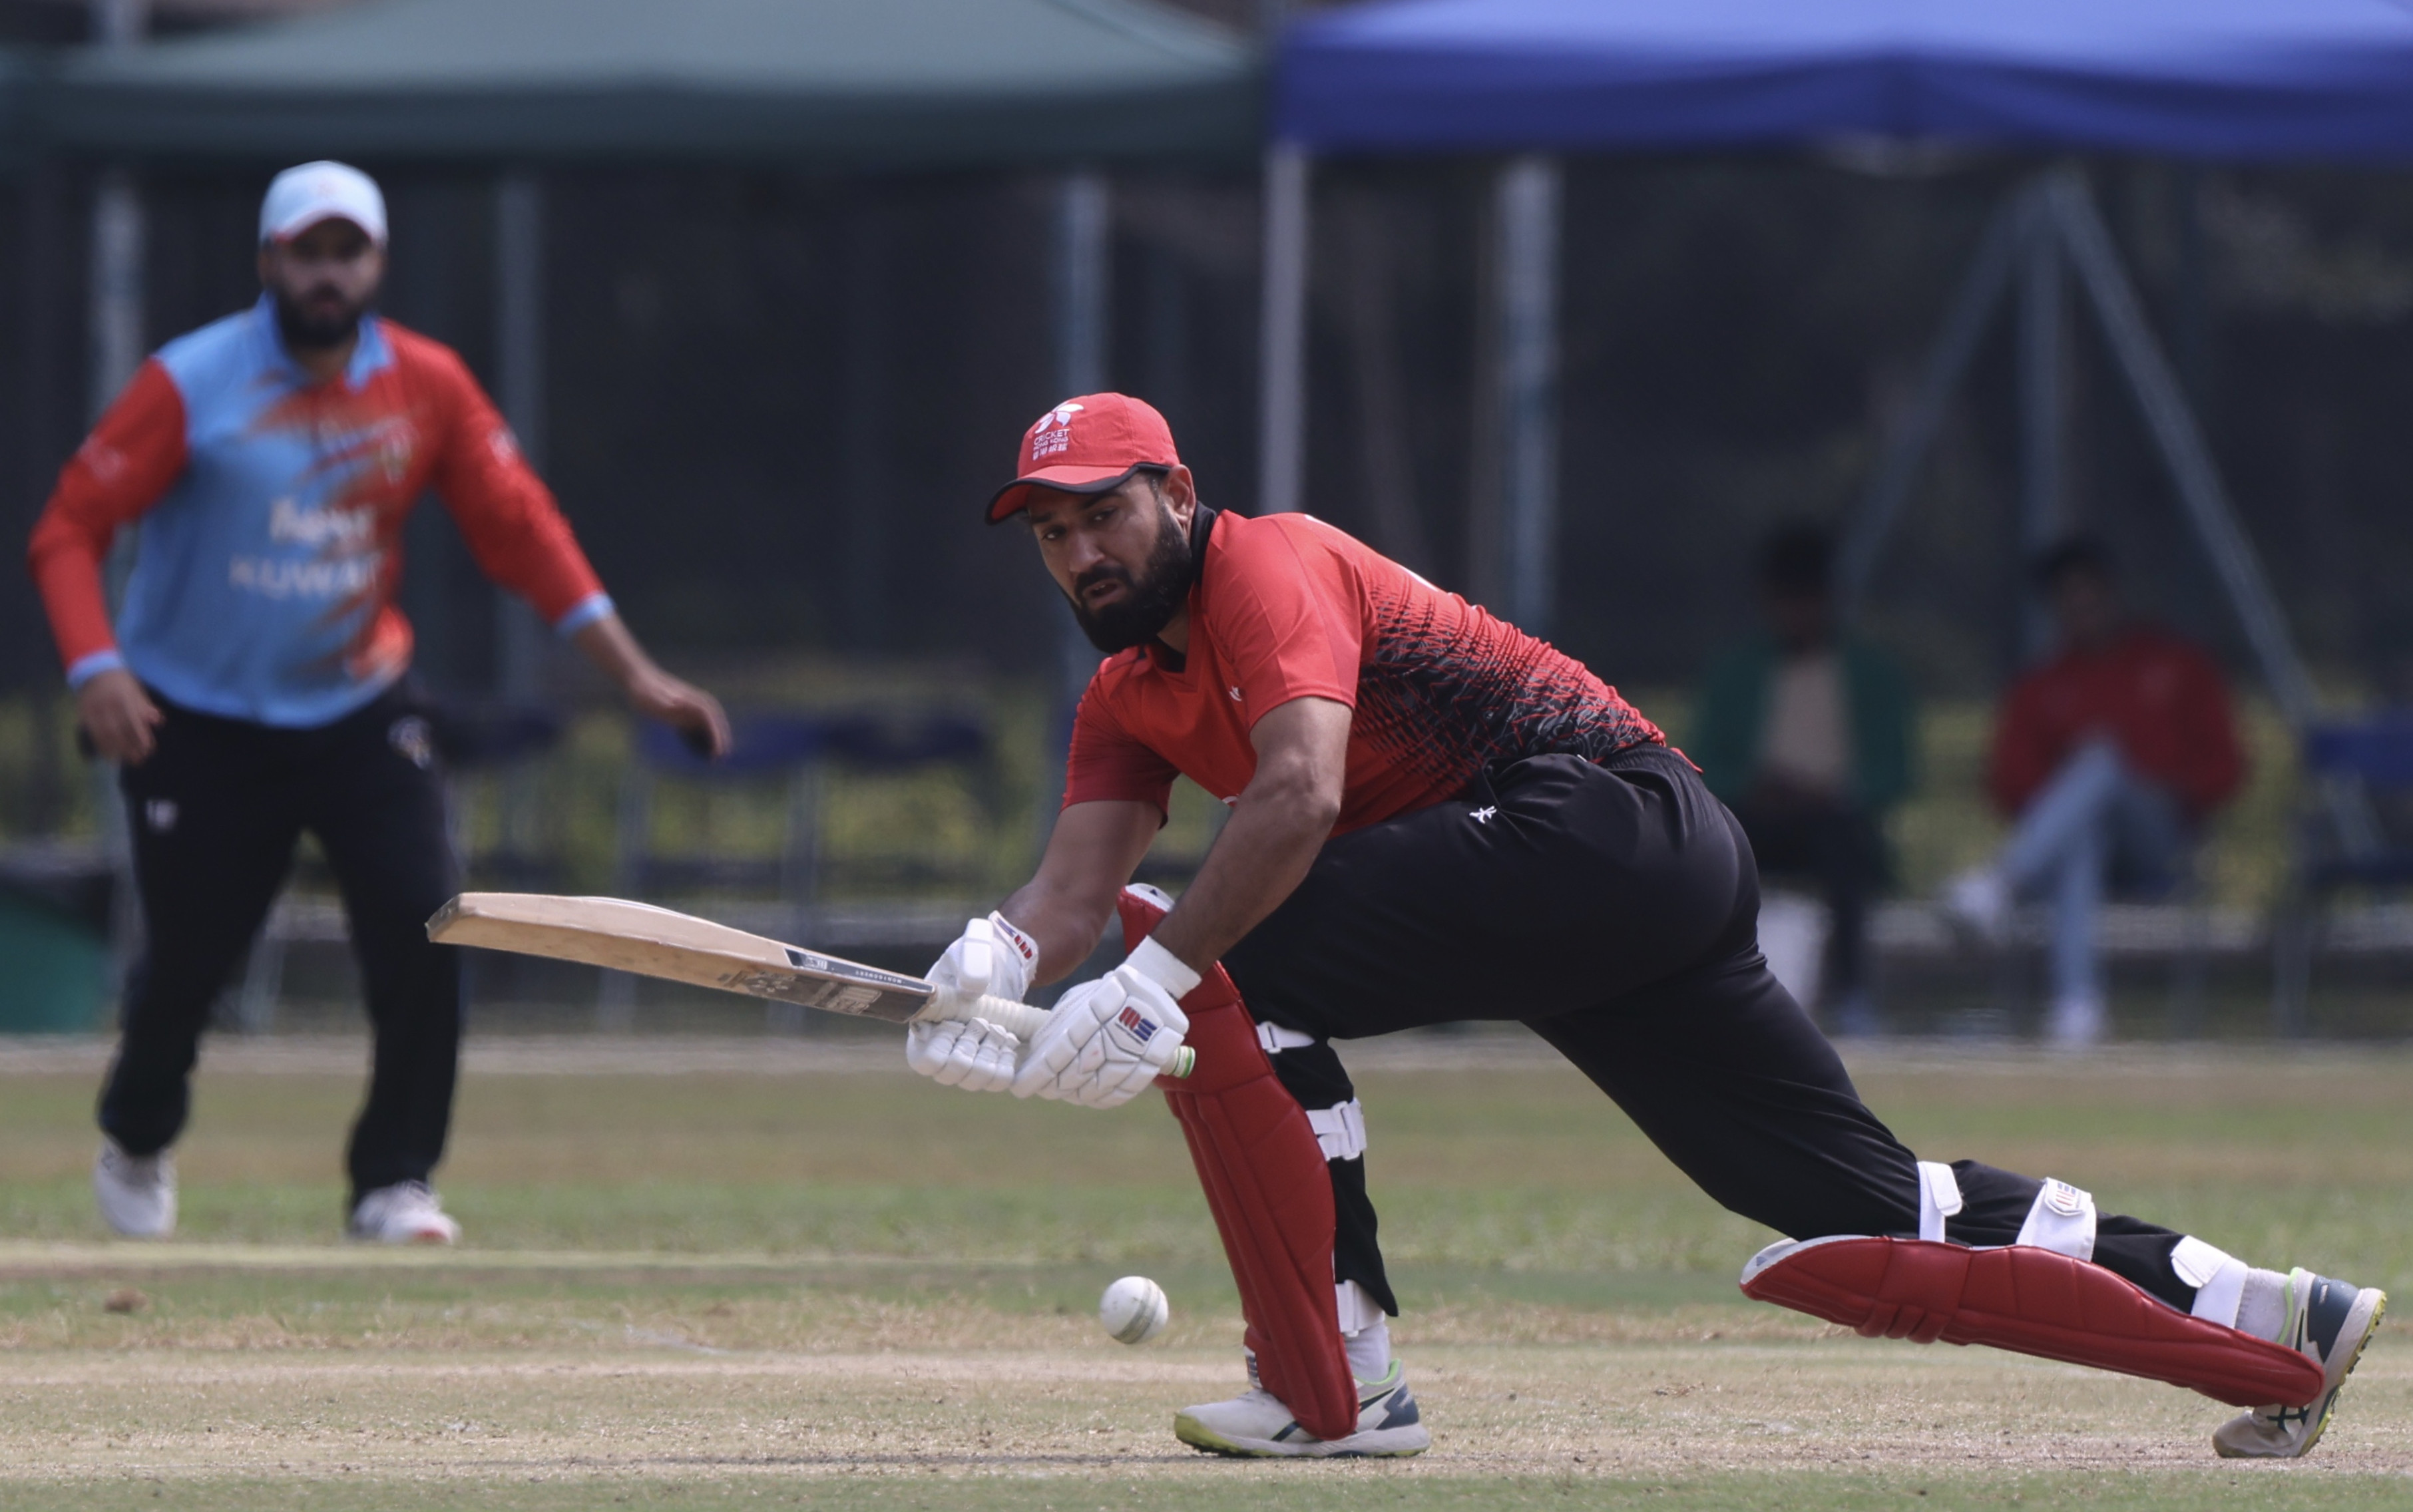 Hong Kong’s Babar Hayat plays the ball away to midwicket during his side’s game against Kuwait. Photo: Jonathan Wong